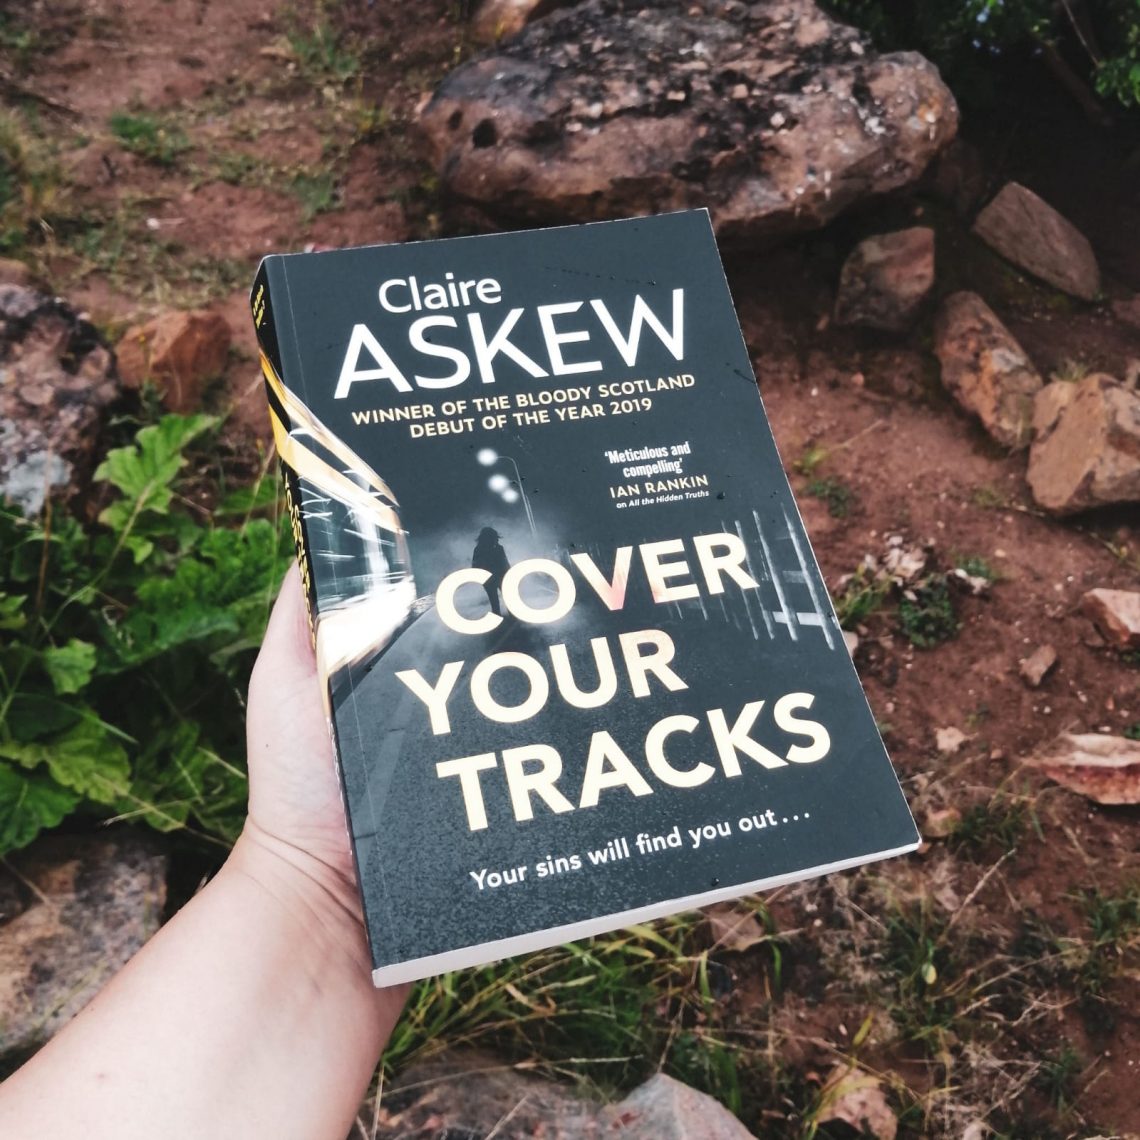 Cover Your Tracks